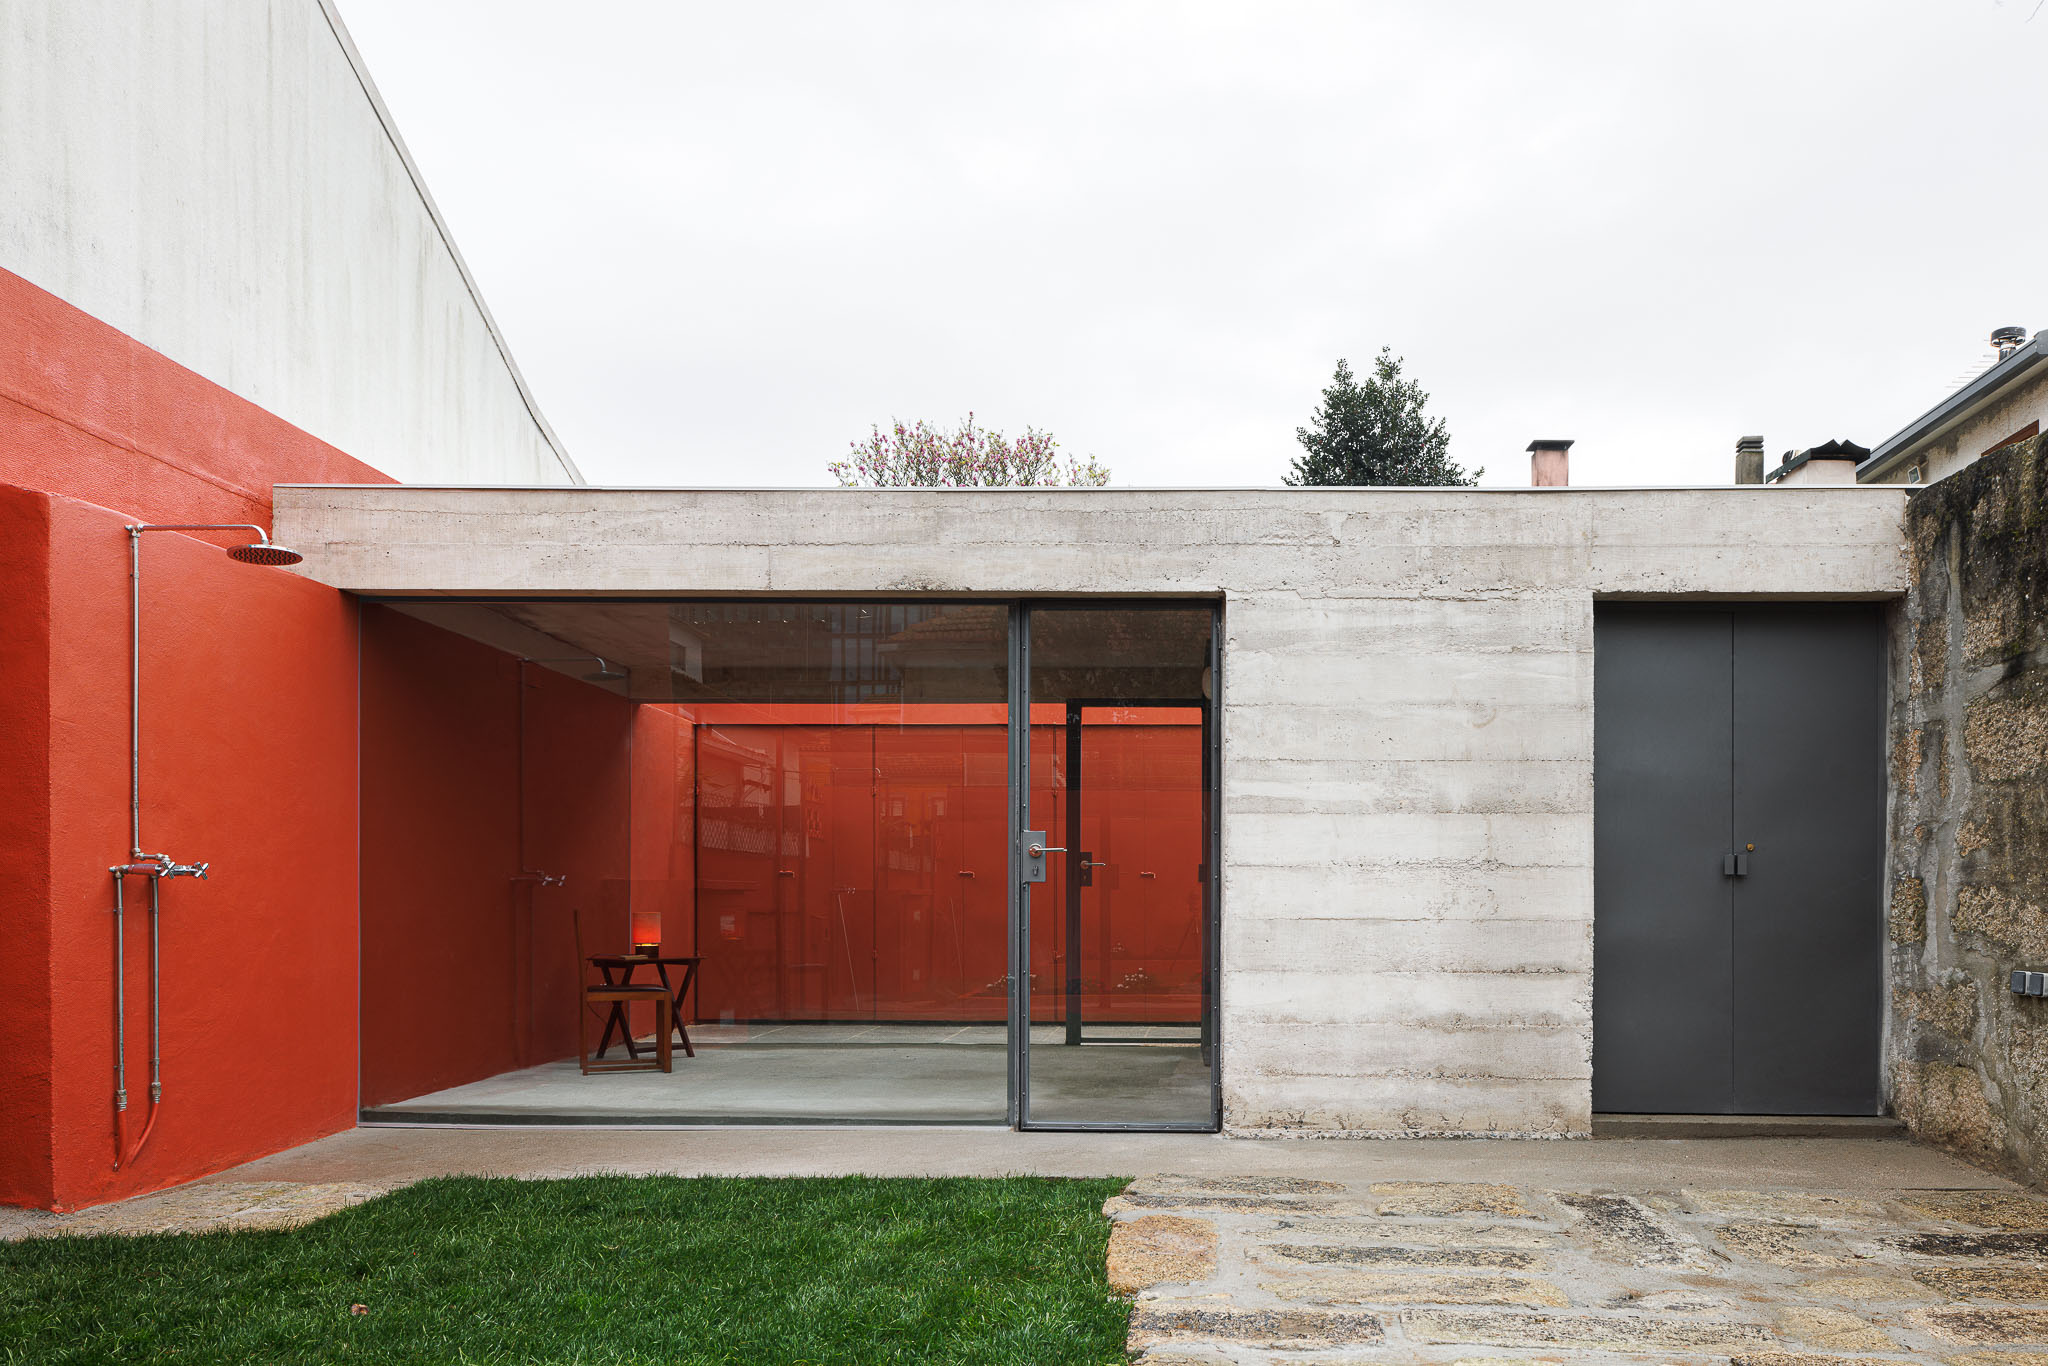 Garden Pavilion was designed by JosÃ© Pedro Lima to complement the program of a house